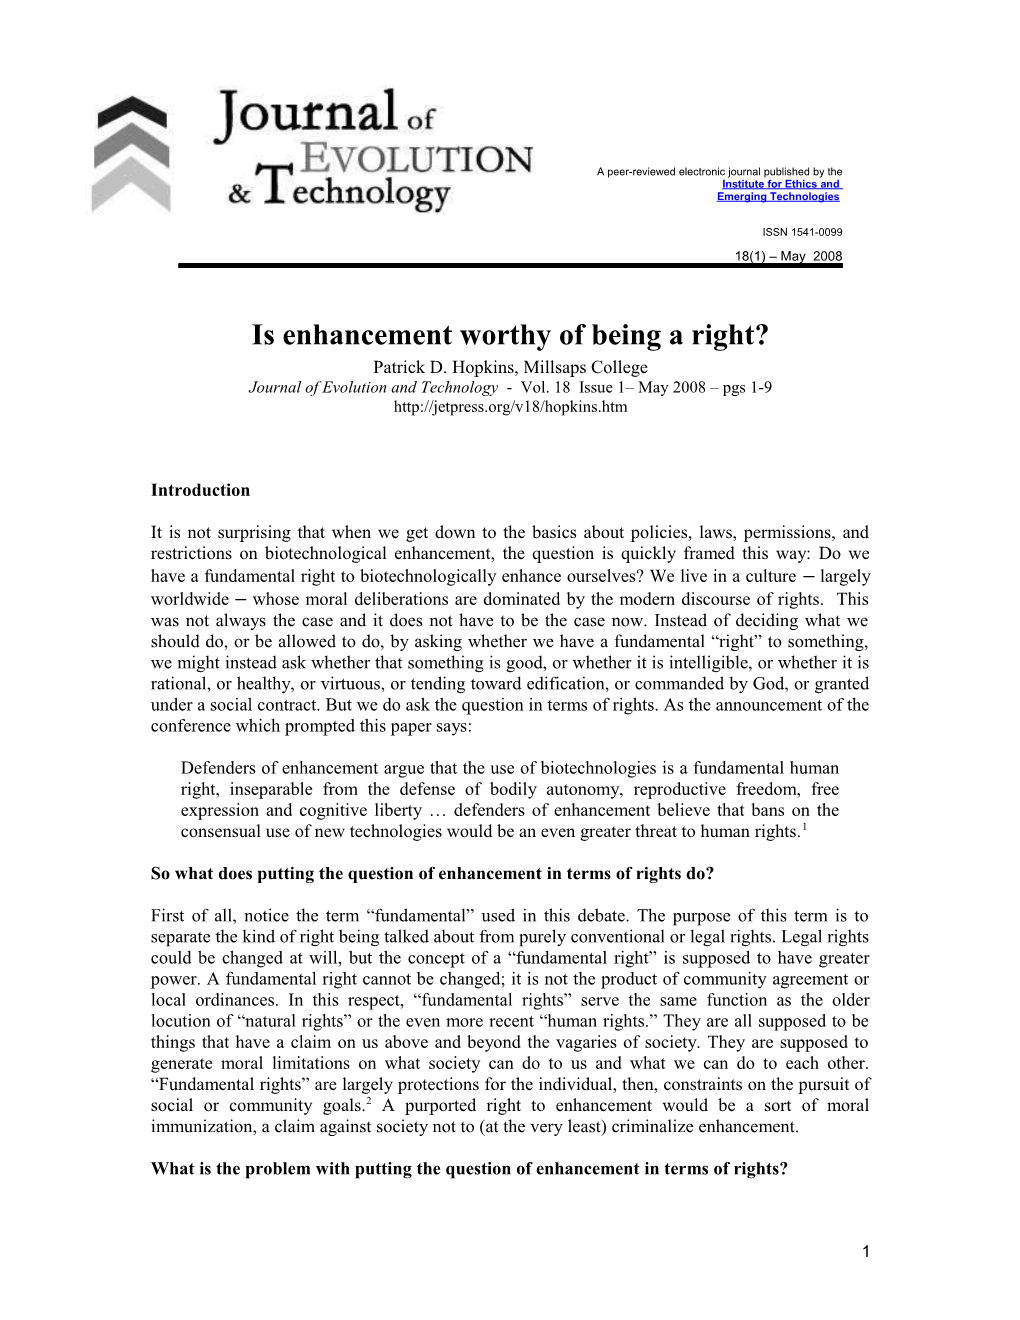 Enhancement and Rights